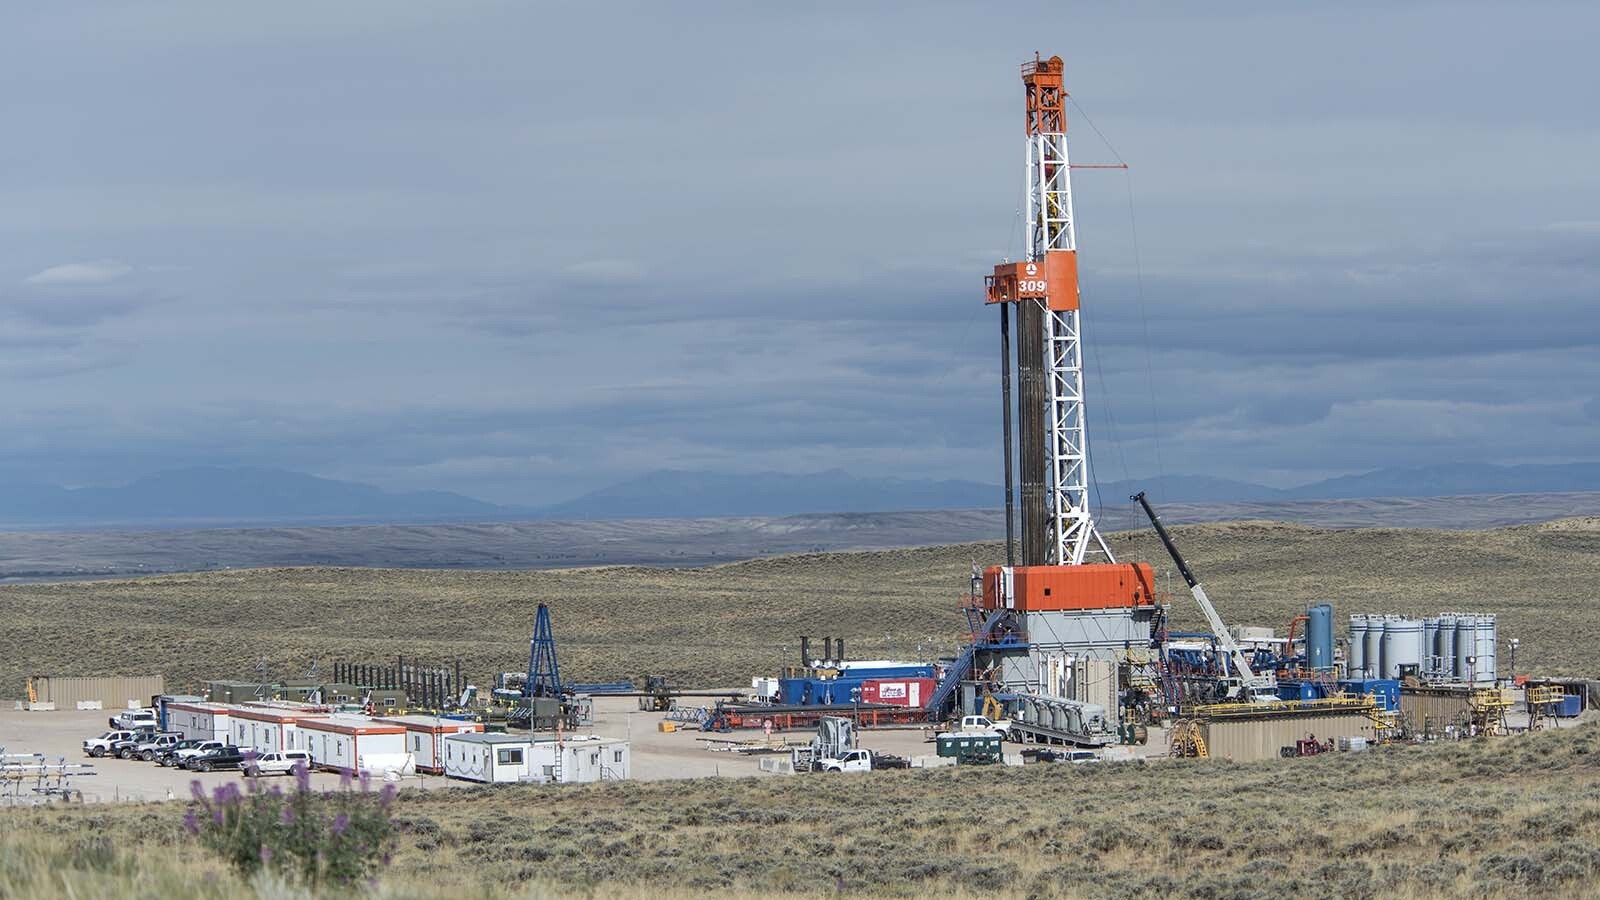 A rig operating in Wyoming, file photo.